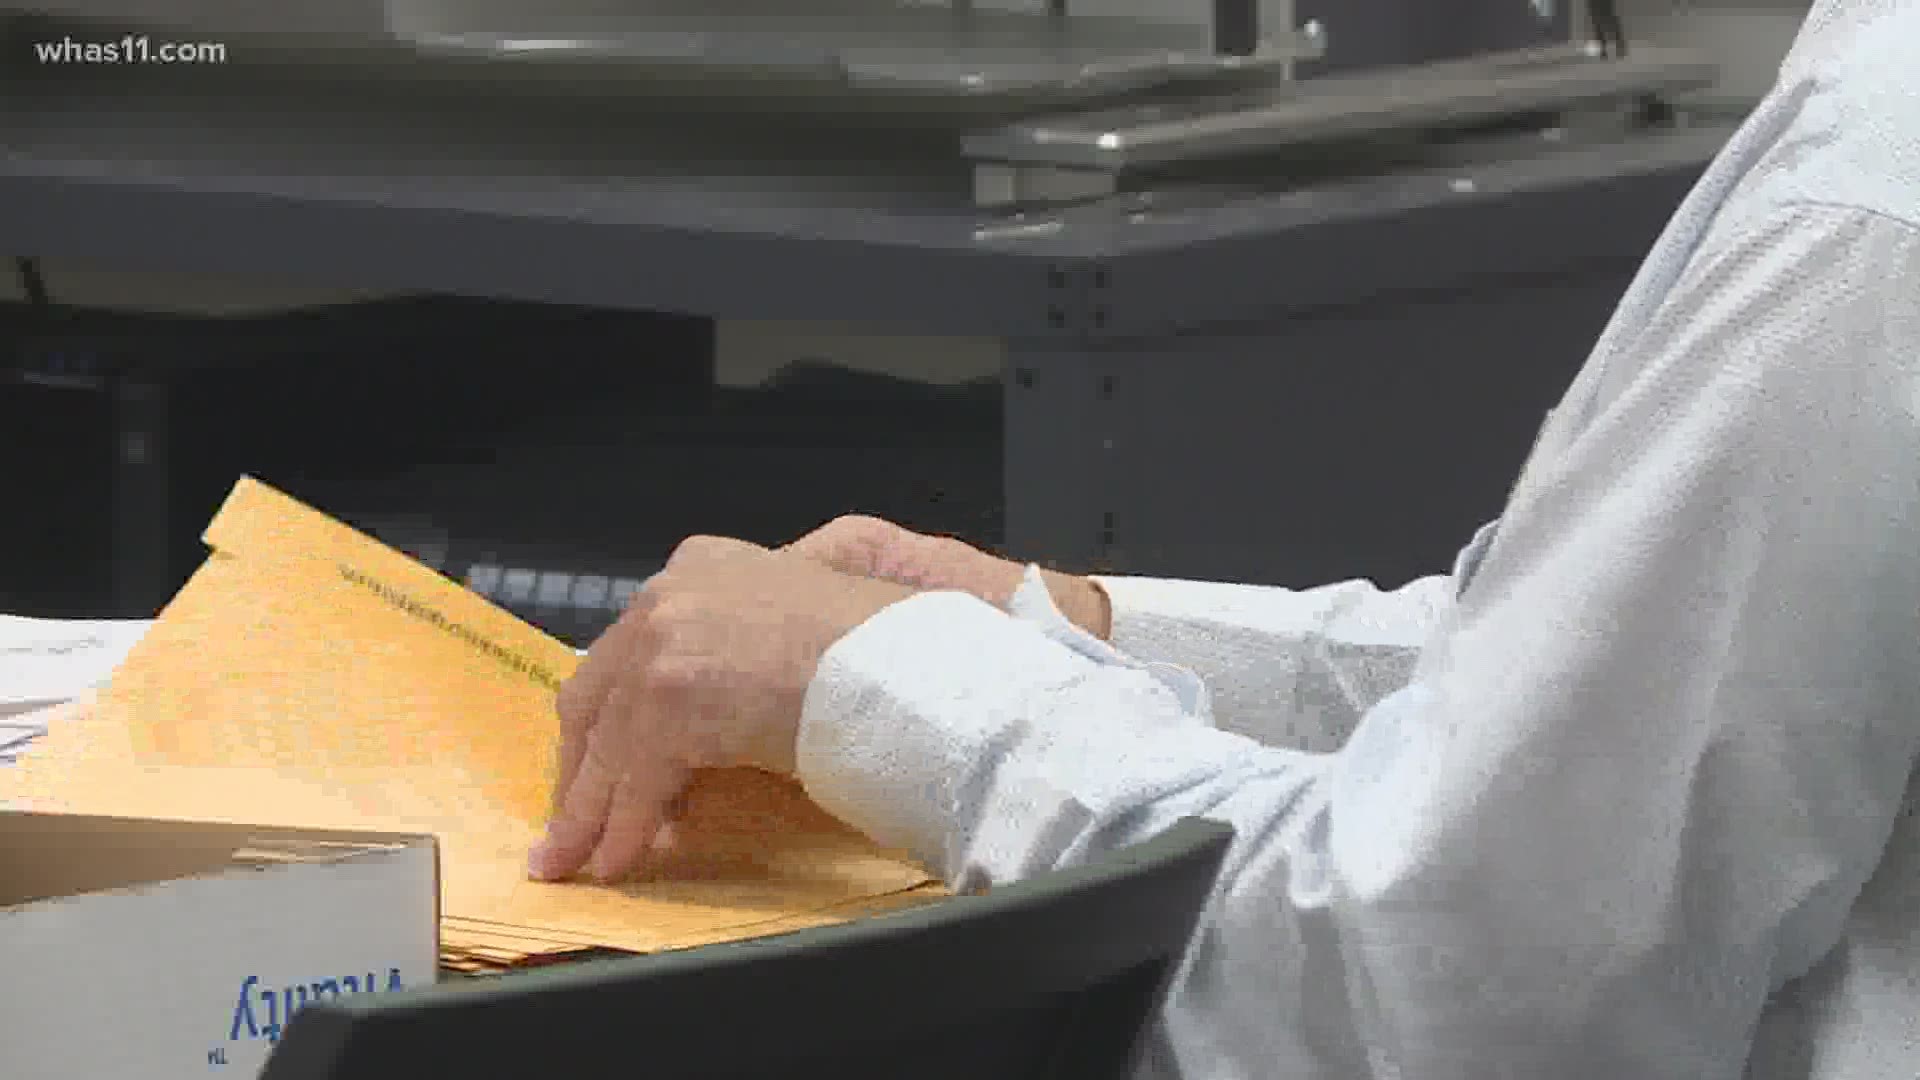 A june 23rd or earlier postmark is needed... but Nore Ghiabudy with the clerks office says another issue is that some voters did not follow posted rules, failing to